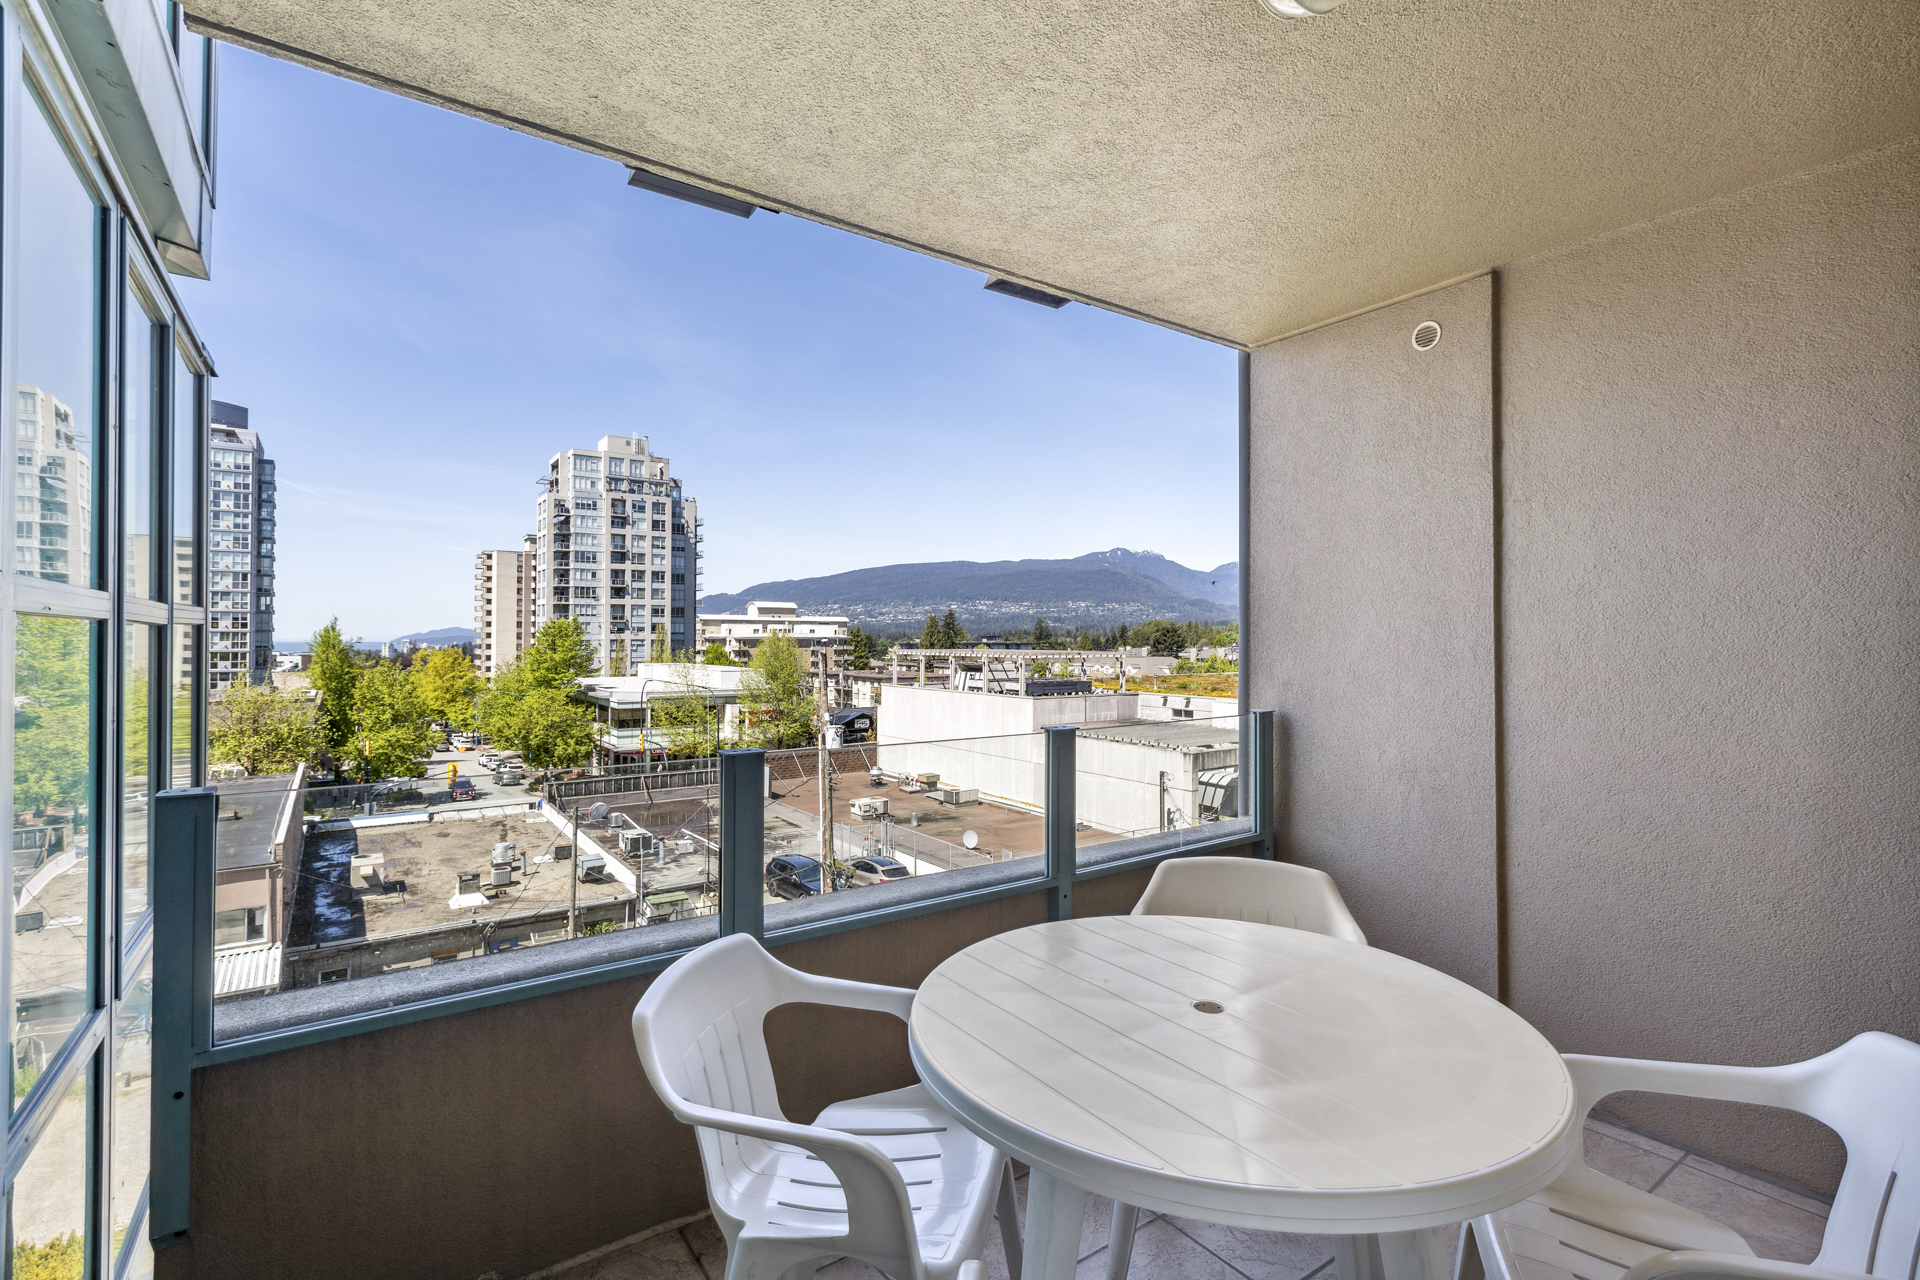 504 1555 Eastern Avenue, North Vancouver - For sale by Rossetti - photo 6